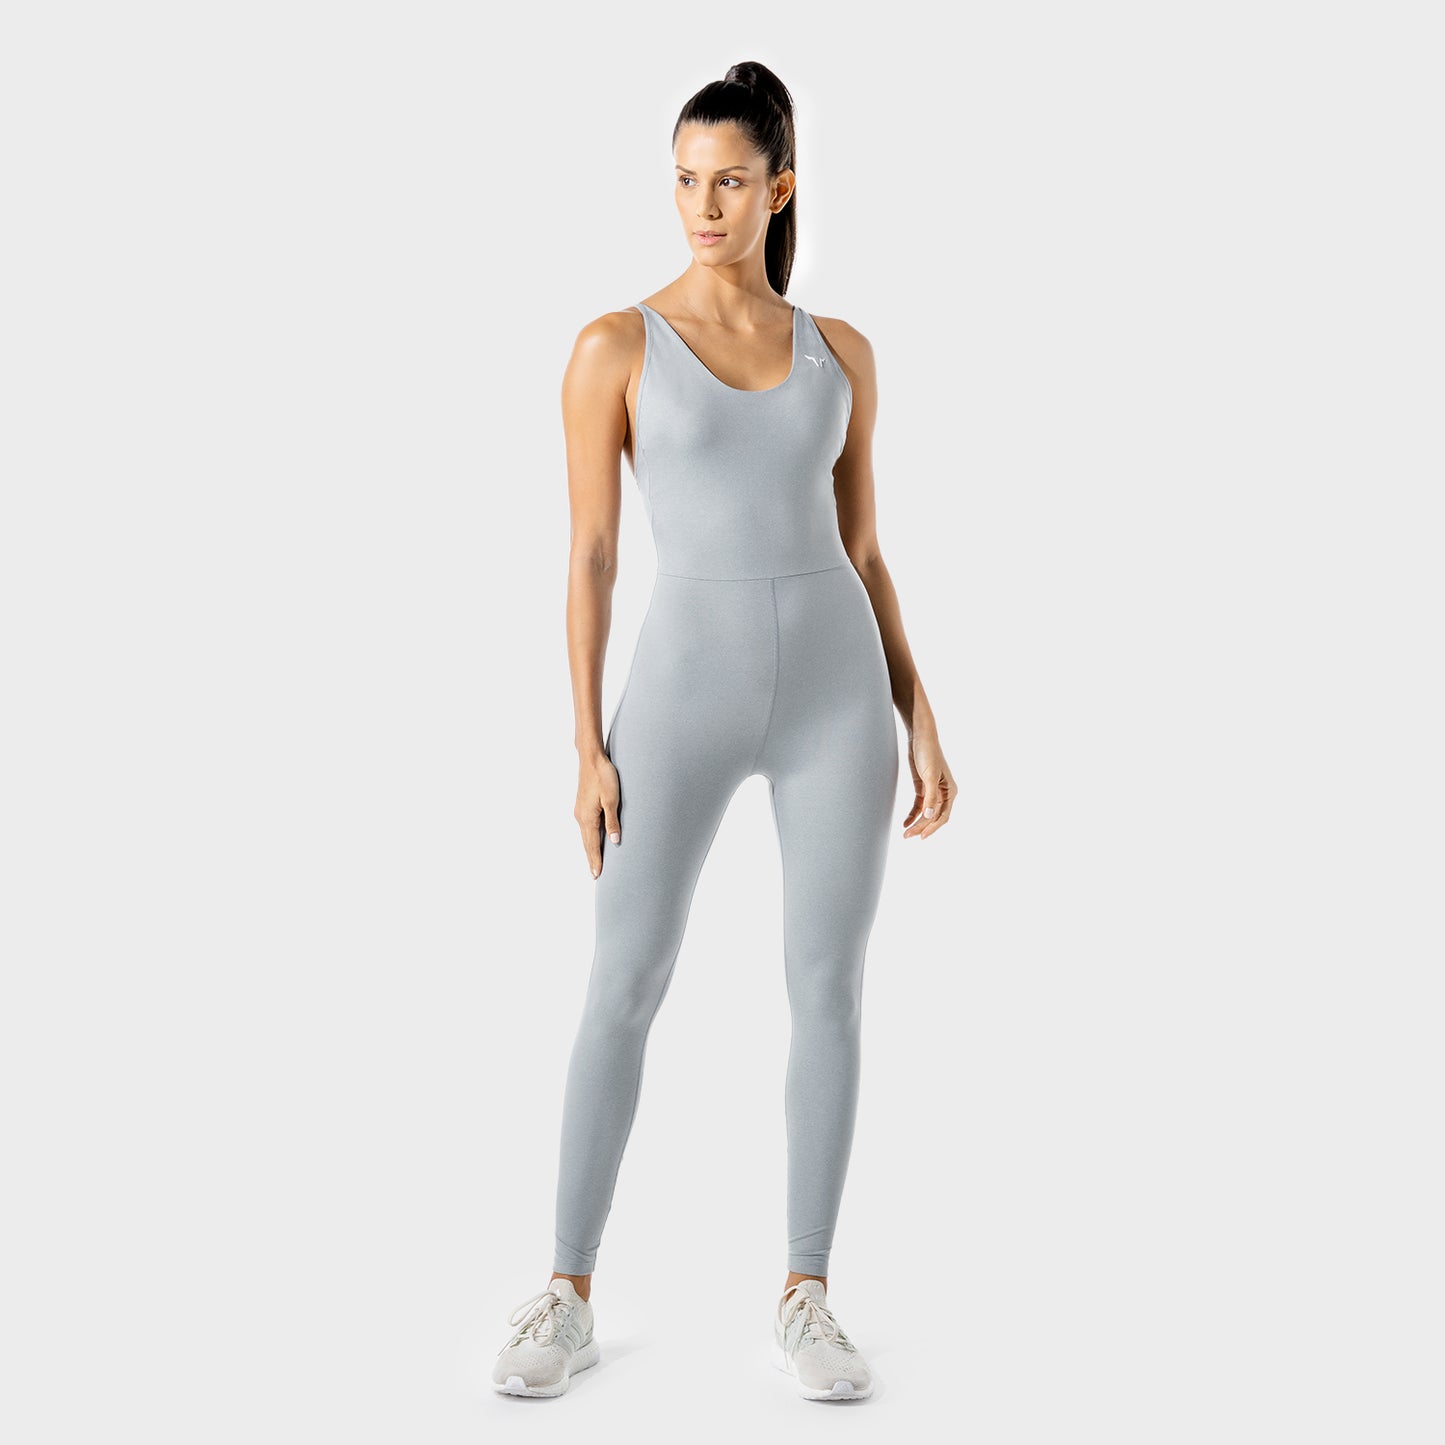 Women Fitness Gym Suits – HER SHOP